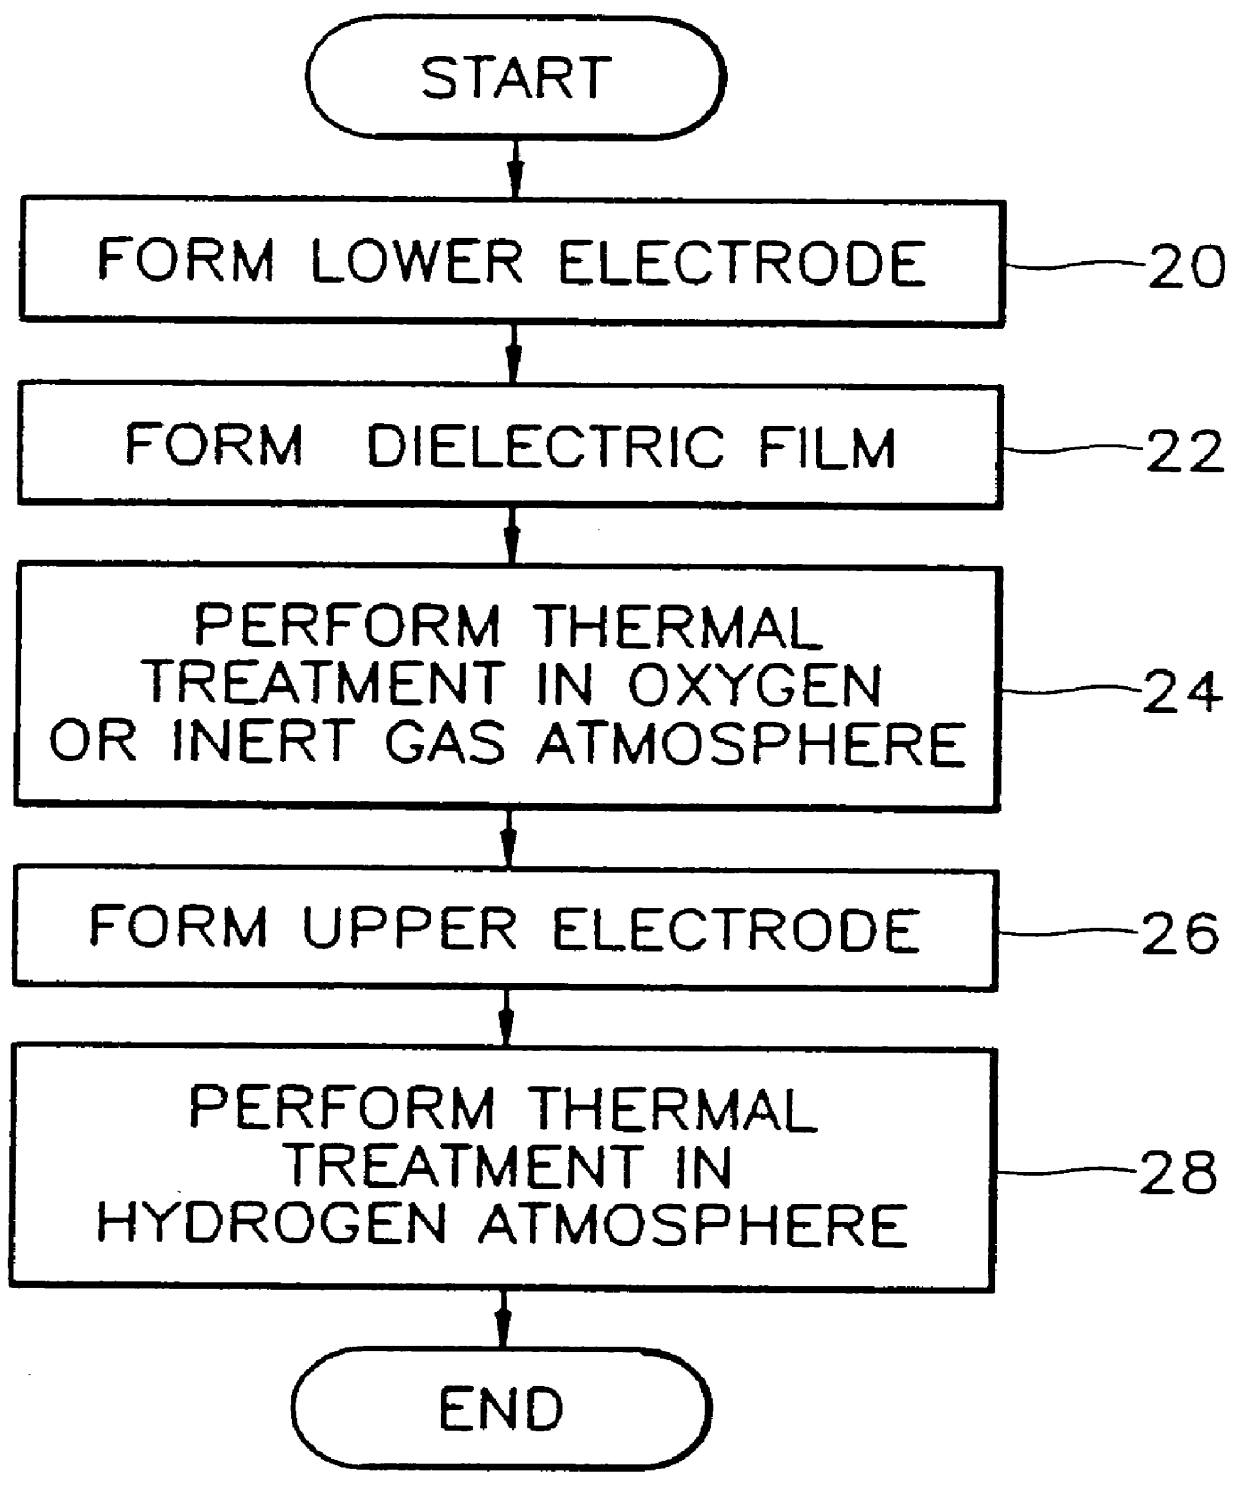 Method for manufacturing capacitor of semiconductor device including thermal treatment to dielectric film under hydrogen atmosphere